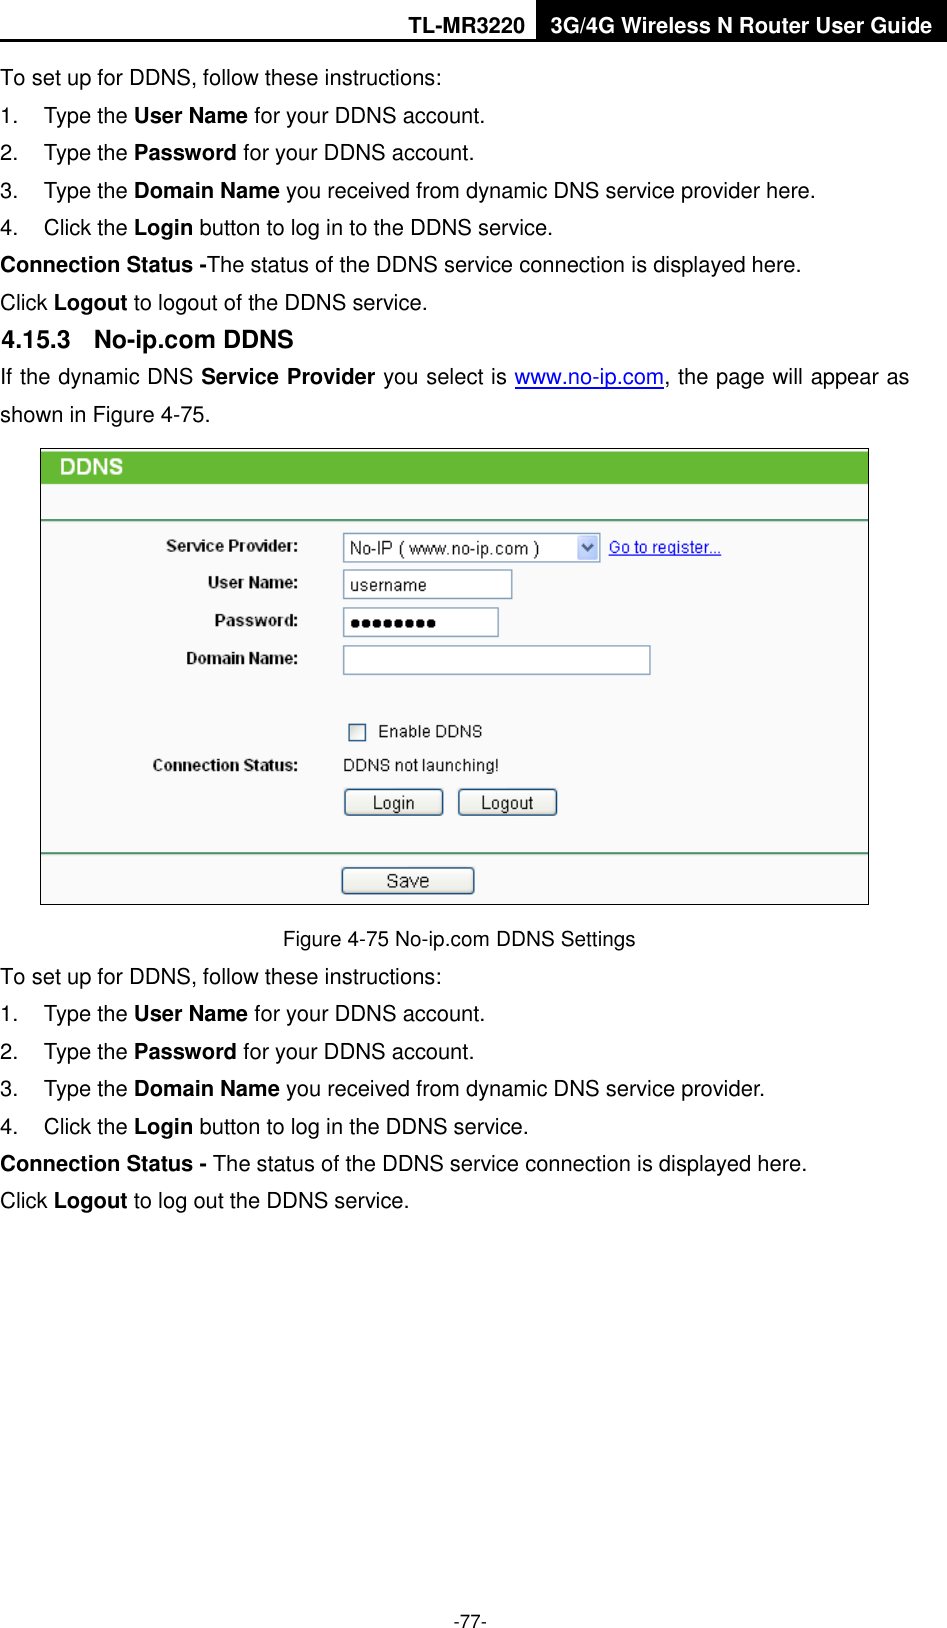 TL-MR3220 3G/4G Wireless N Router User Guide  -77- To set up for DDNS, follow these instructions: 1.  Type the User Name for your DDNS account.   2.  Type the Password for your DDNS account.   3.  Type the Domain Name you received from dynamic DNS service provider here.   4.  Click the Login button to log in to the DDNS service. Connection Status -The status of the DDNS service connection is displayed here. Click Logout to logout of the DDNS service.   4.15.3  No-ip.com DDNS If the dynamic DNS Service Provider you select is www.no-ip.com, the page will appear as shown in Figure 4-75.  Figure 4-75 No-ip.com DDNS Settings To set up for DDNS, follow these instructions: 1.  Type the User Name for your DDNS account.   2.  Type the Password for your DDNS account.   3.  Type the Domain Name you received from dynamic DNS service provider. 4.  Click the Login button to log in the DDNS service. Connection Status - The status of the DDNS service connection is displayed here. Click Logout to log out the DDNS service. 